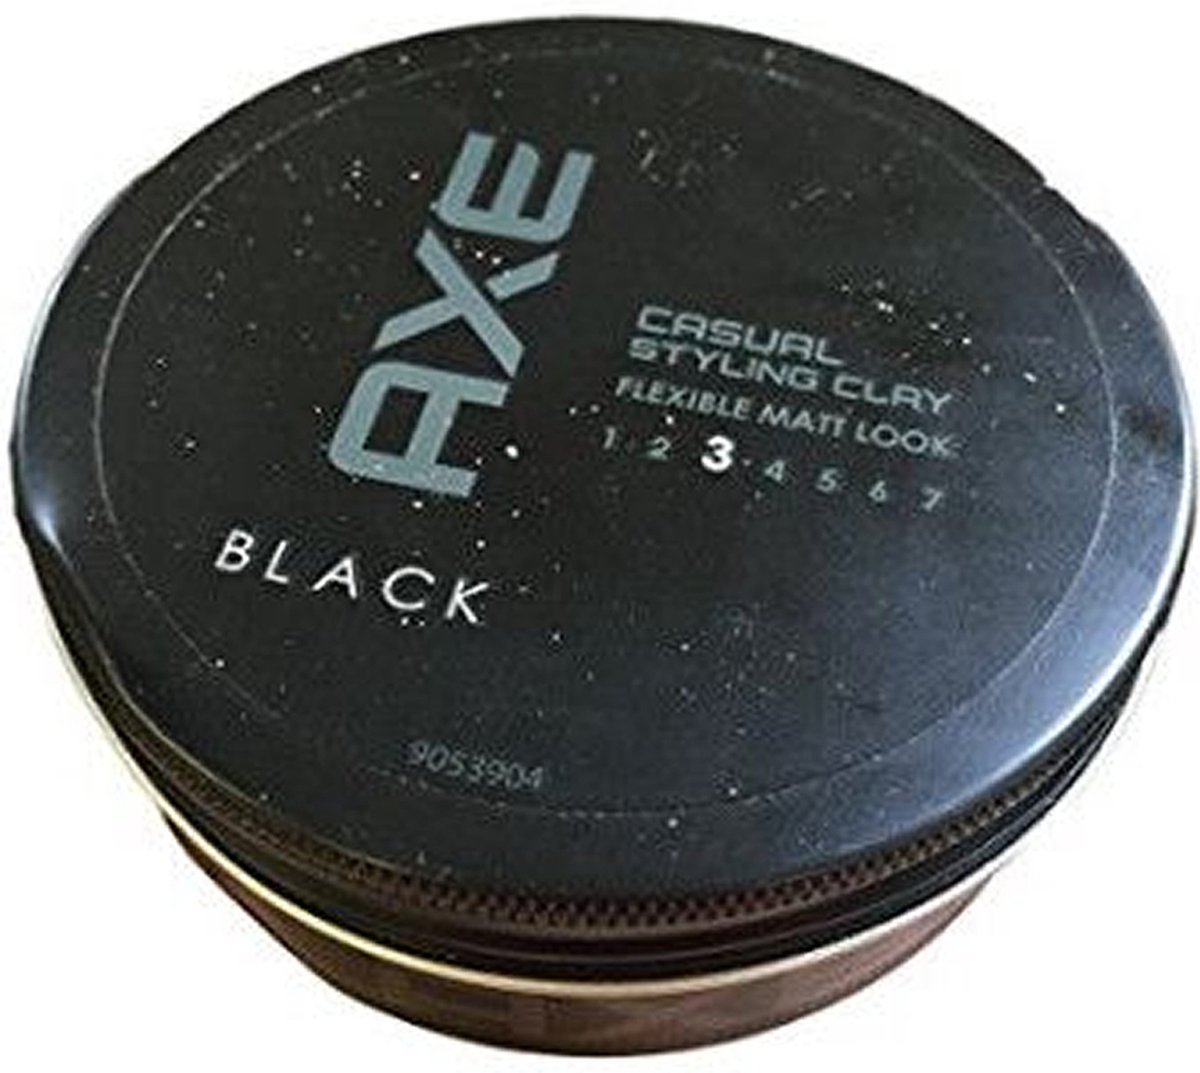 Axe - Casual Styling Clay - Black - 3 - 75ml